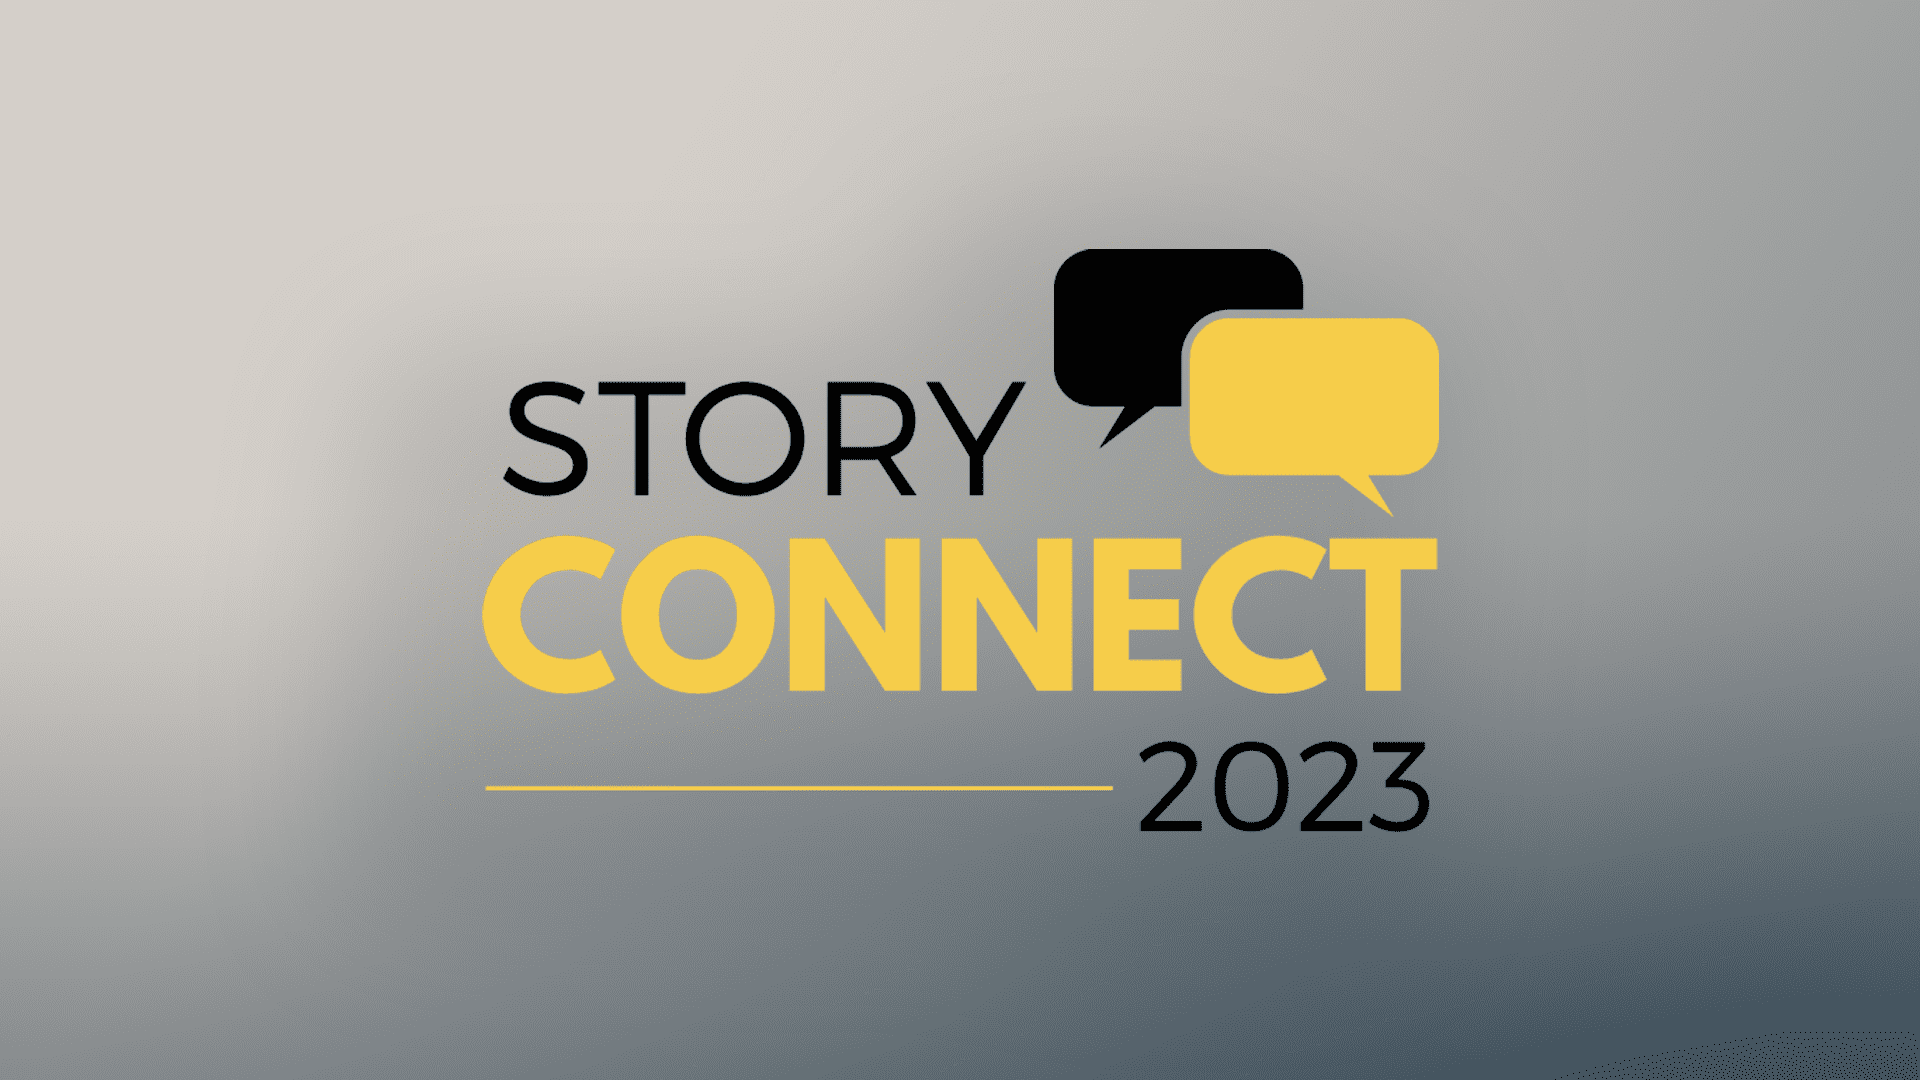 StoryConnect 2023